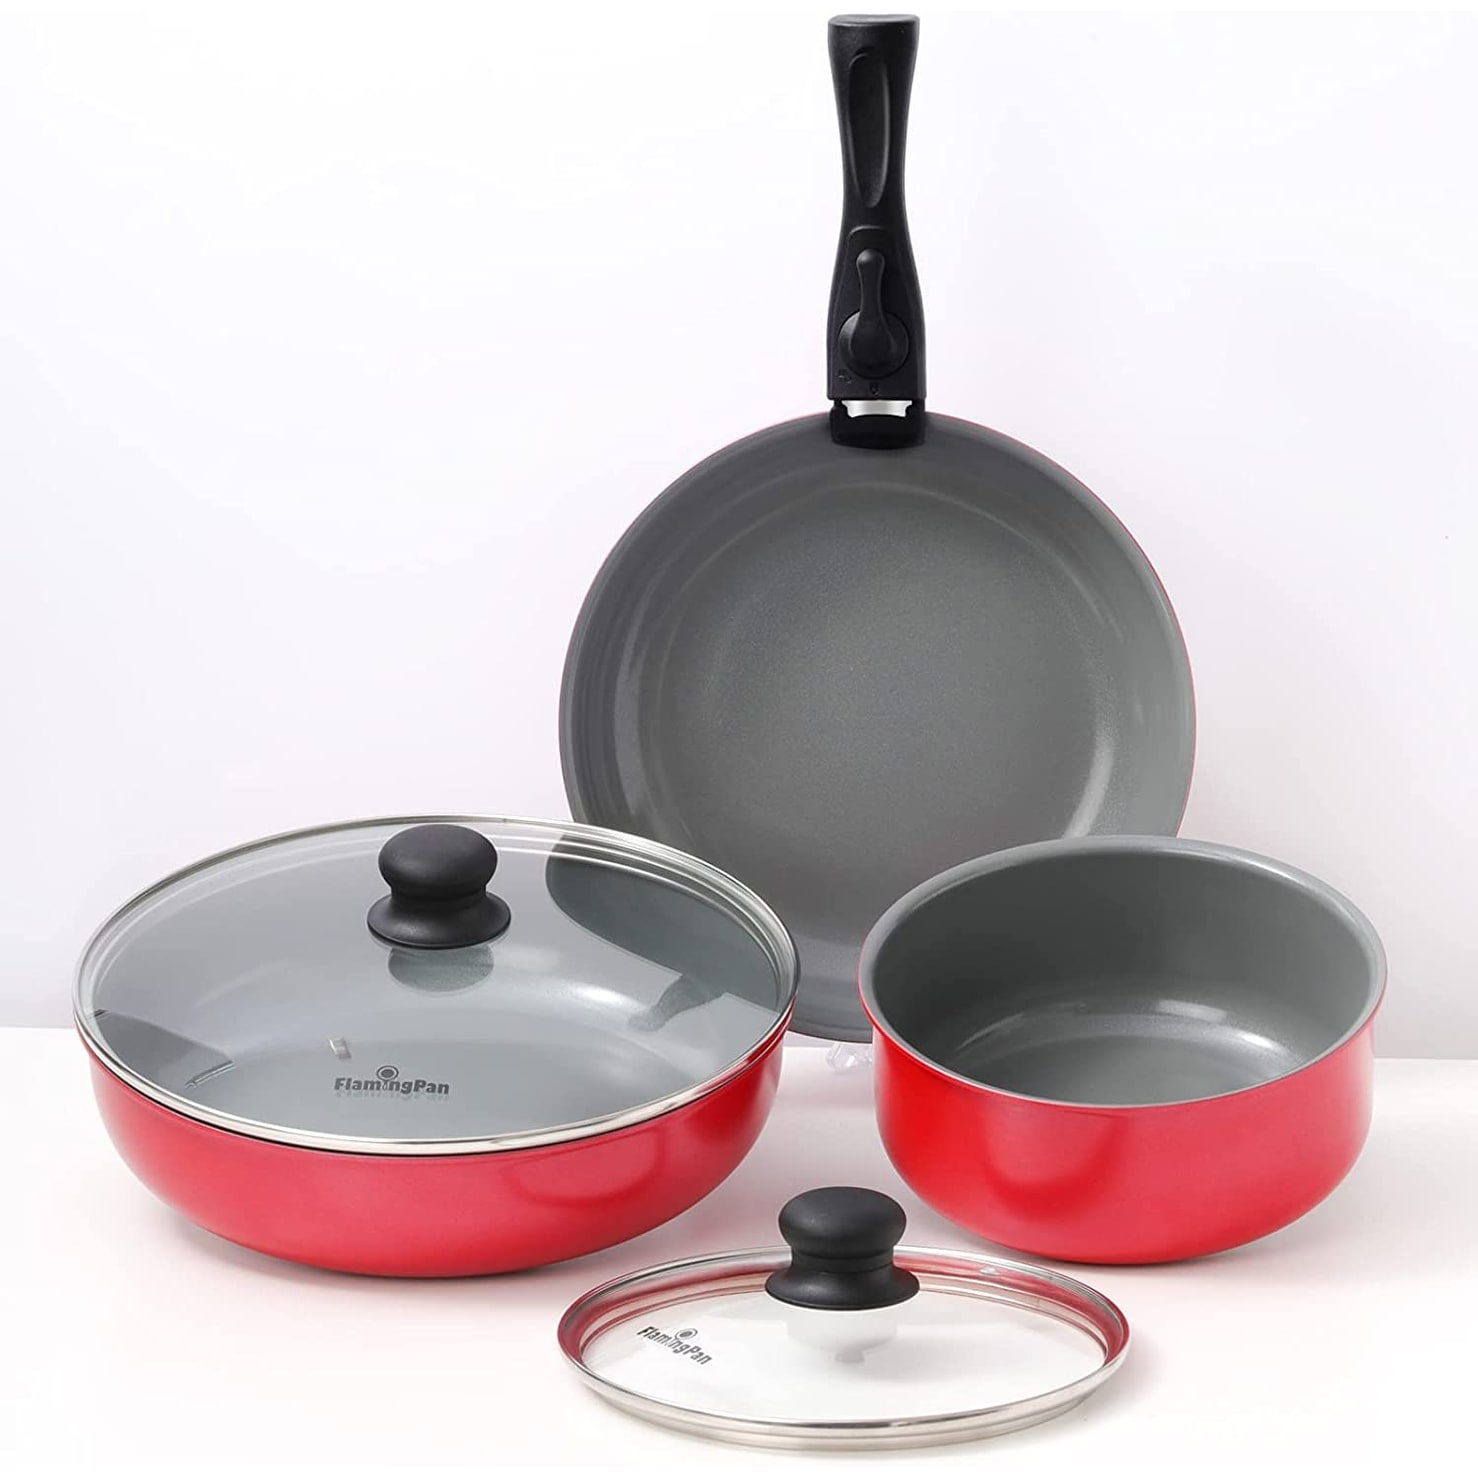 https://ak1.ostkcdn.com/images/products/is/images/direct/01bcd2276e3aef233ad3c93fa310f84cab01b625/6-Pieces-Nonstick-Cookware-Set-and-Pots-and-Pans-Set-with-Removable-Handle.jpg